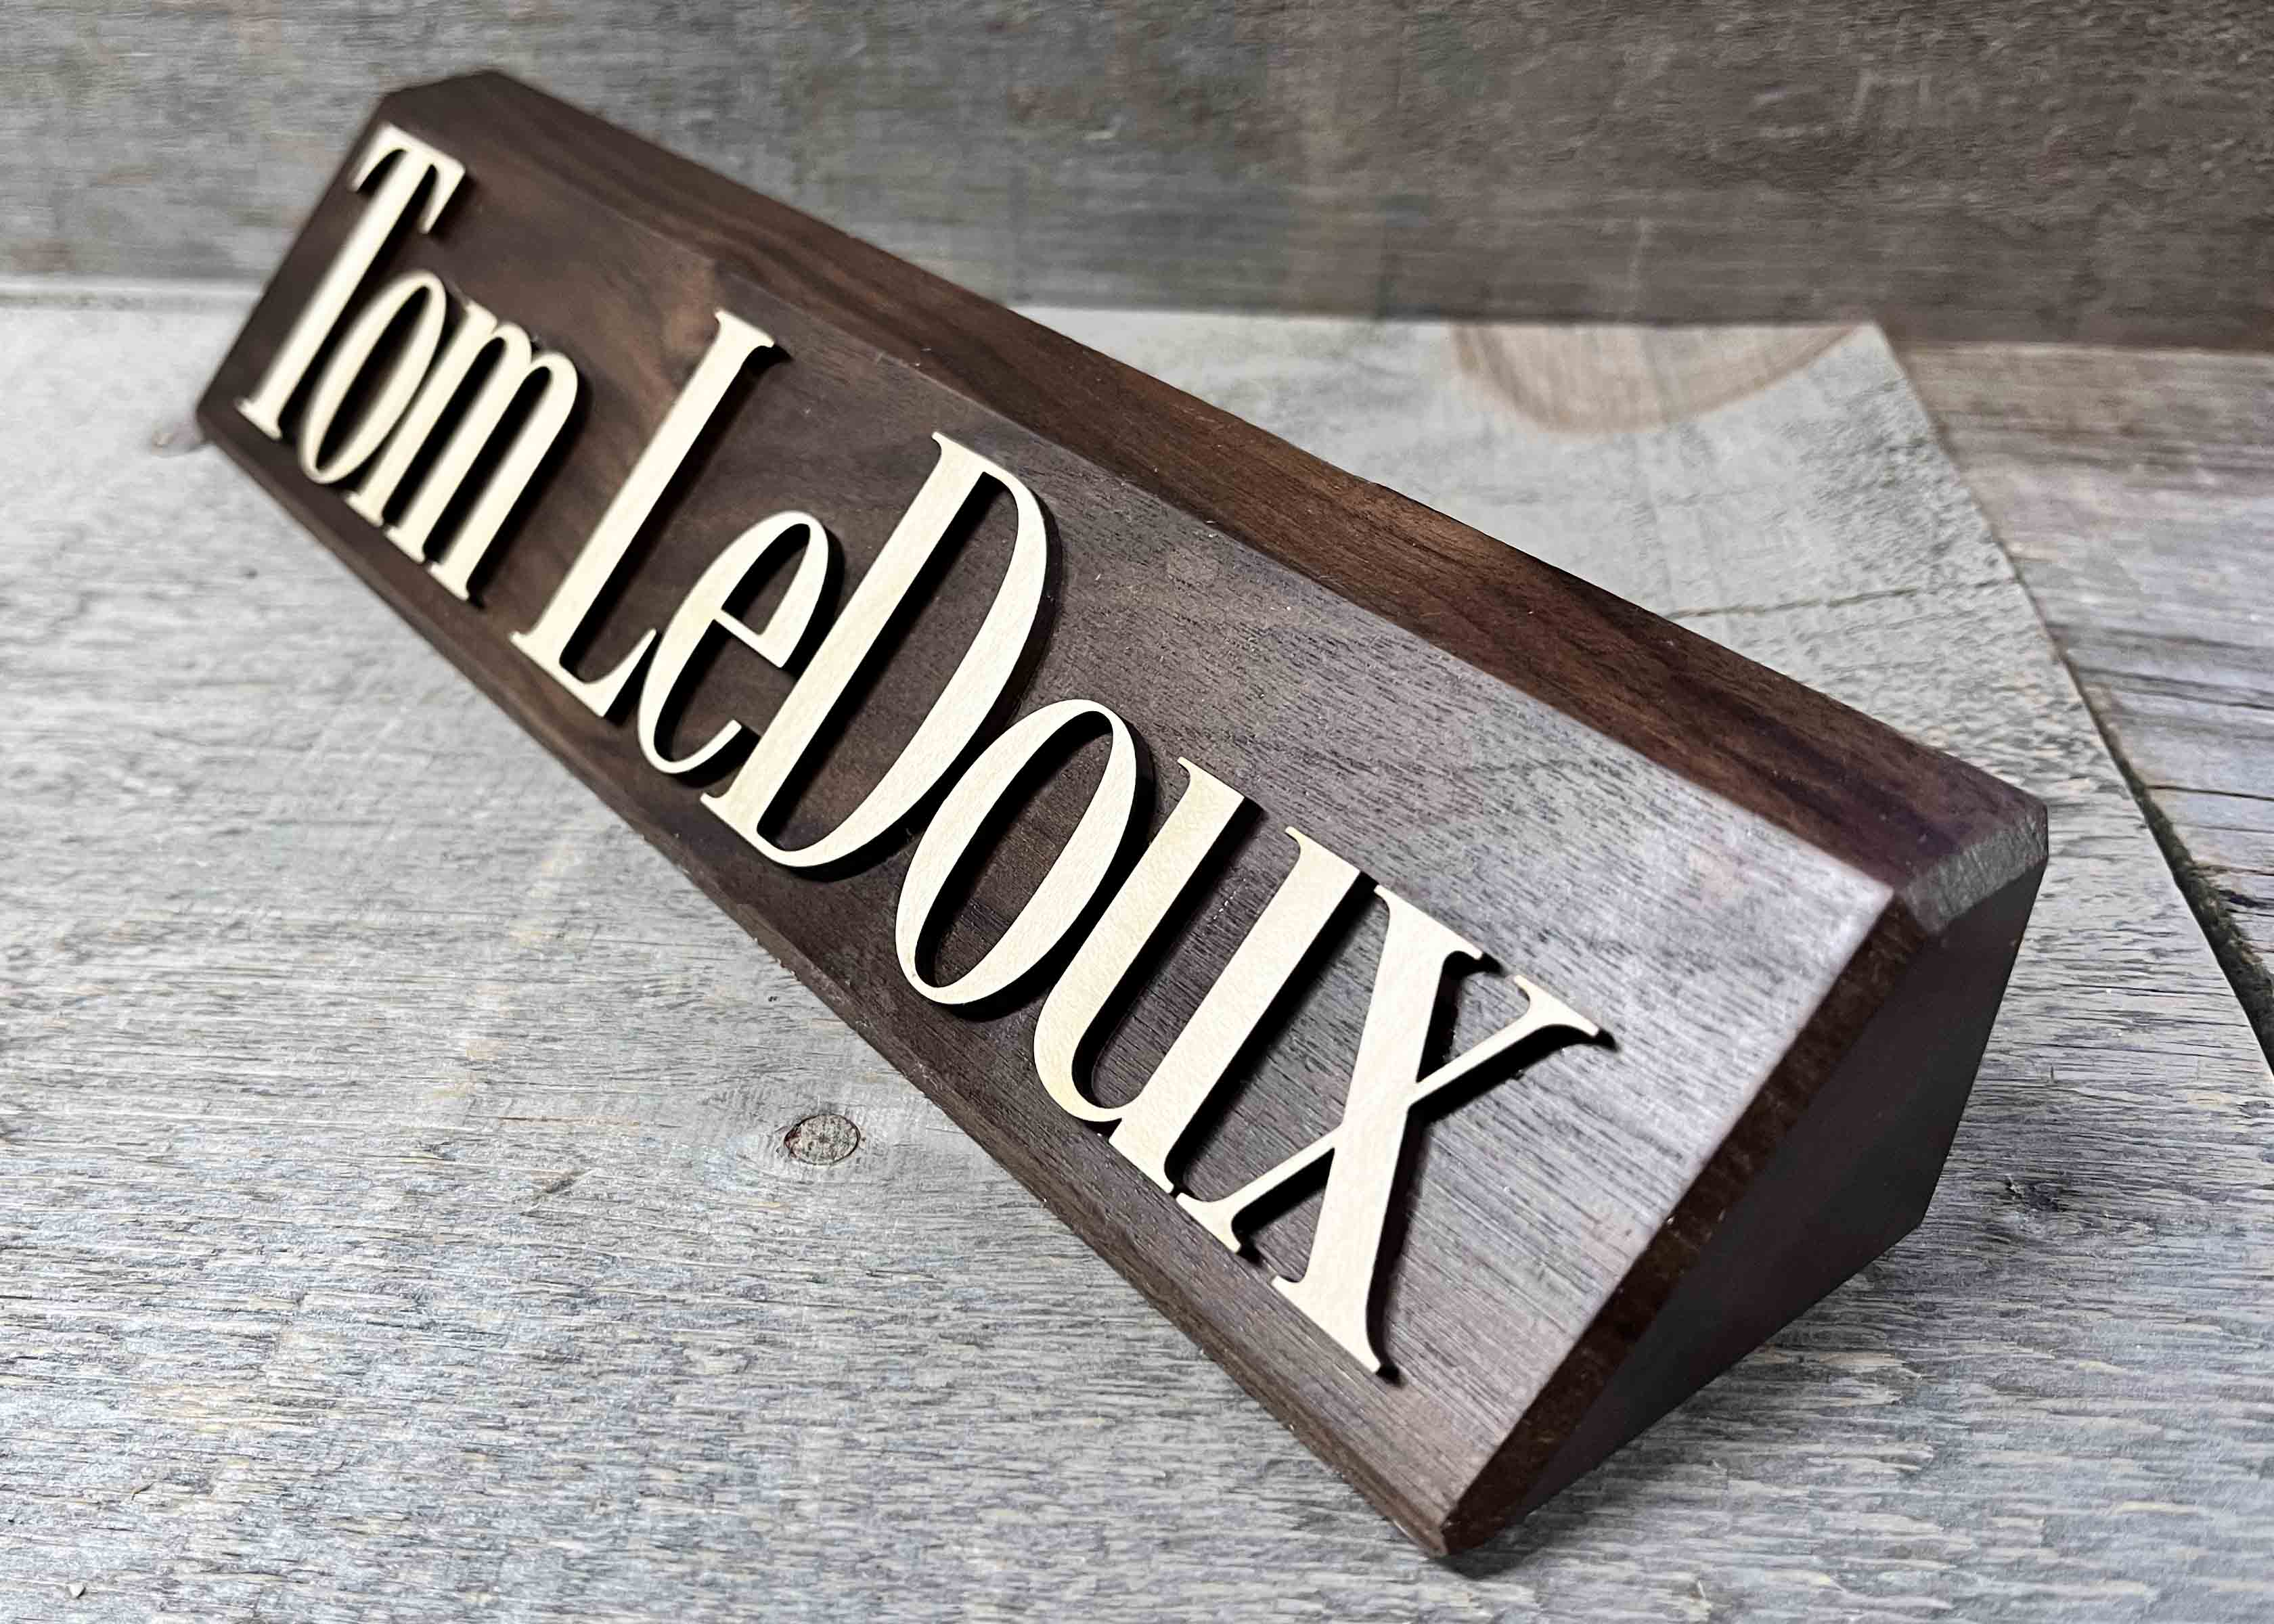 3D Maple and Walnut Desk Name Plate.